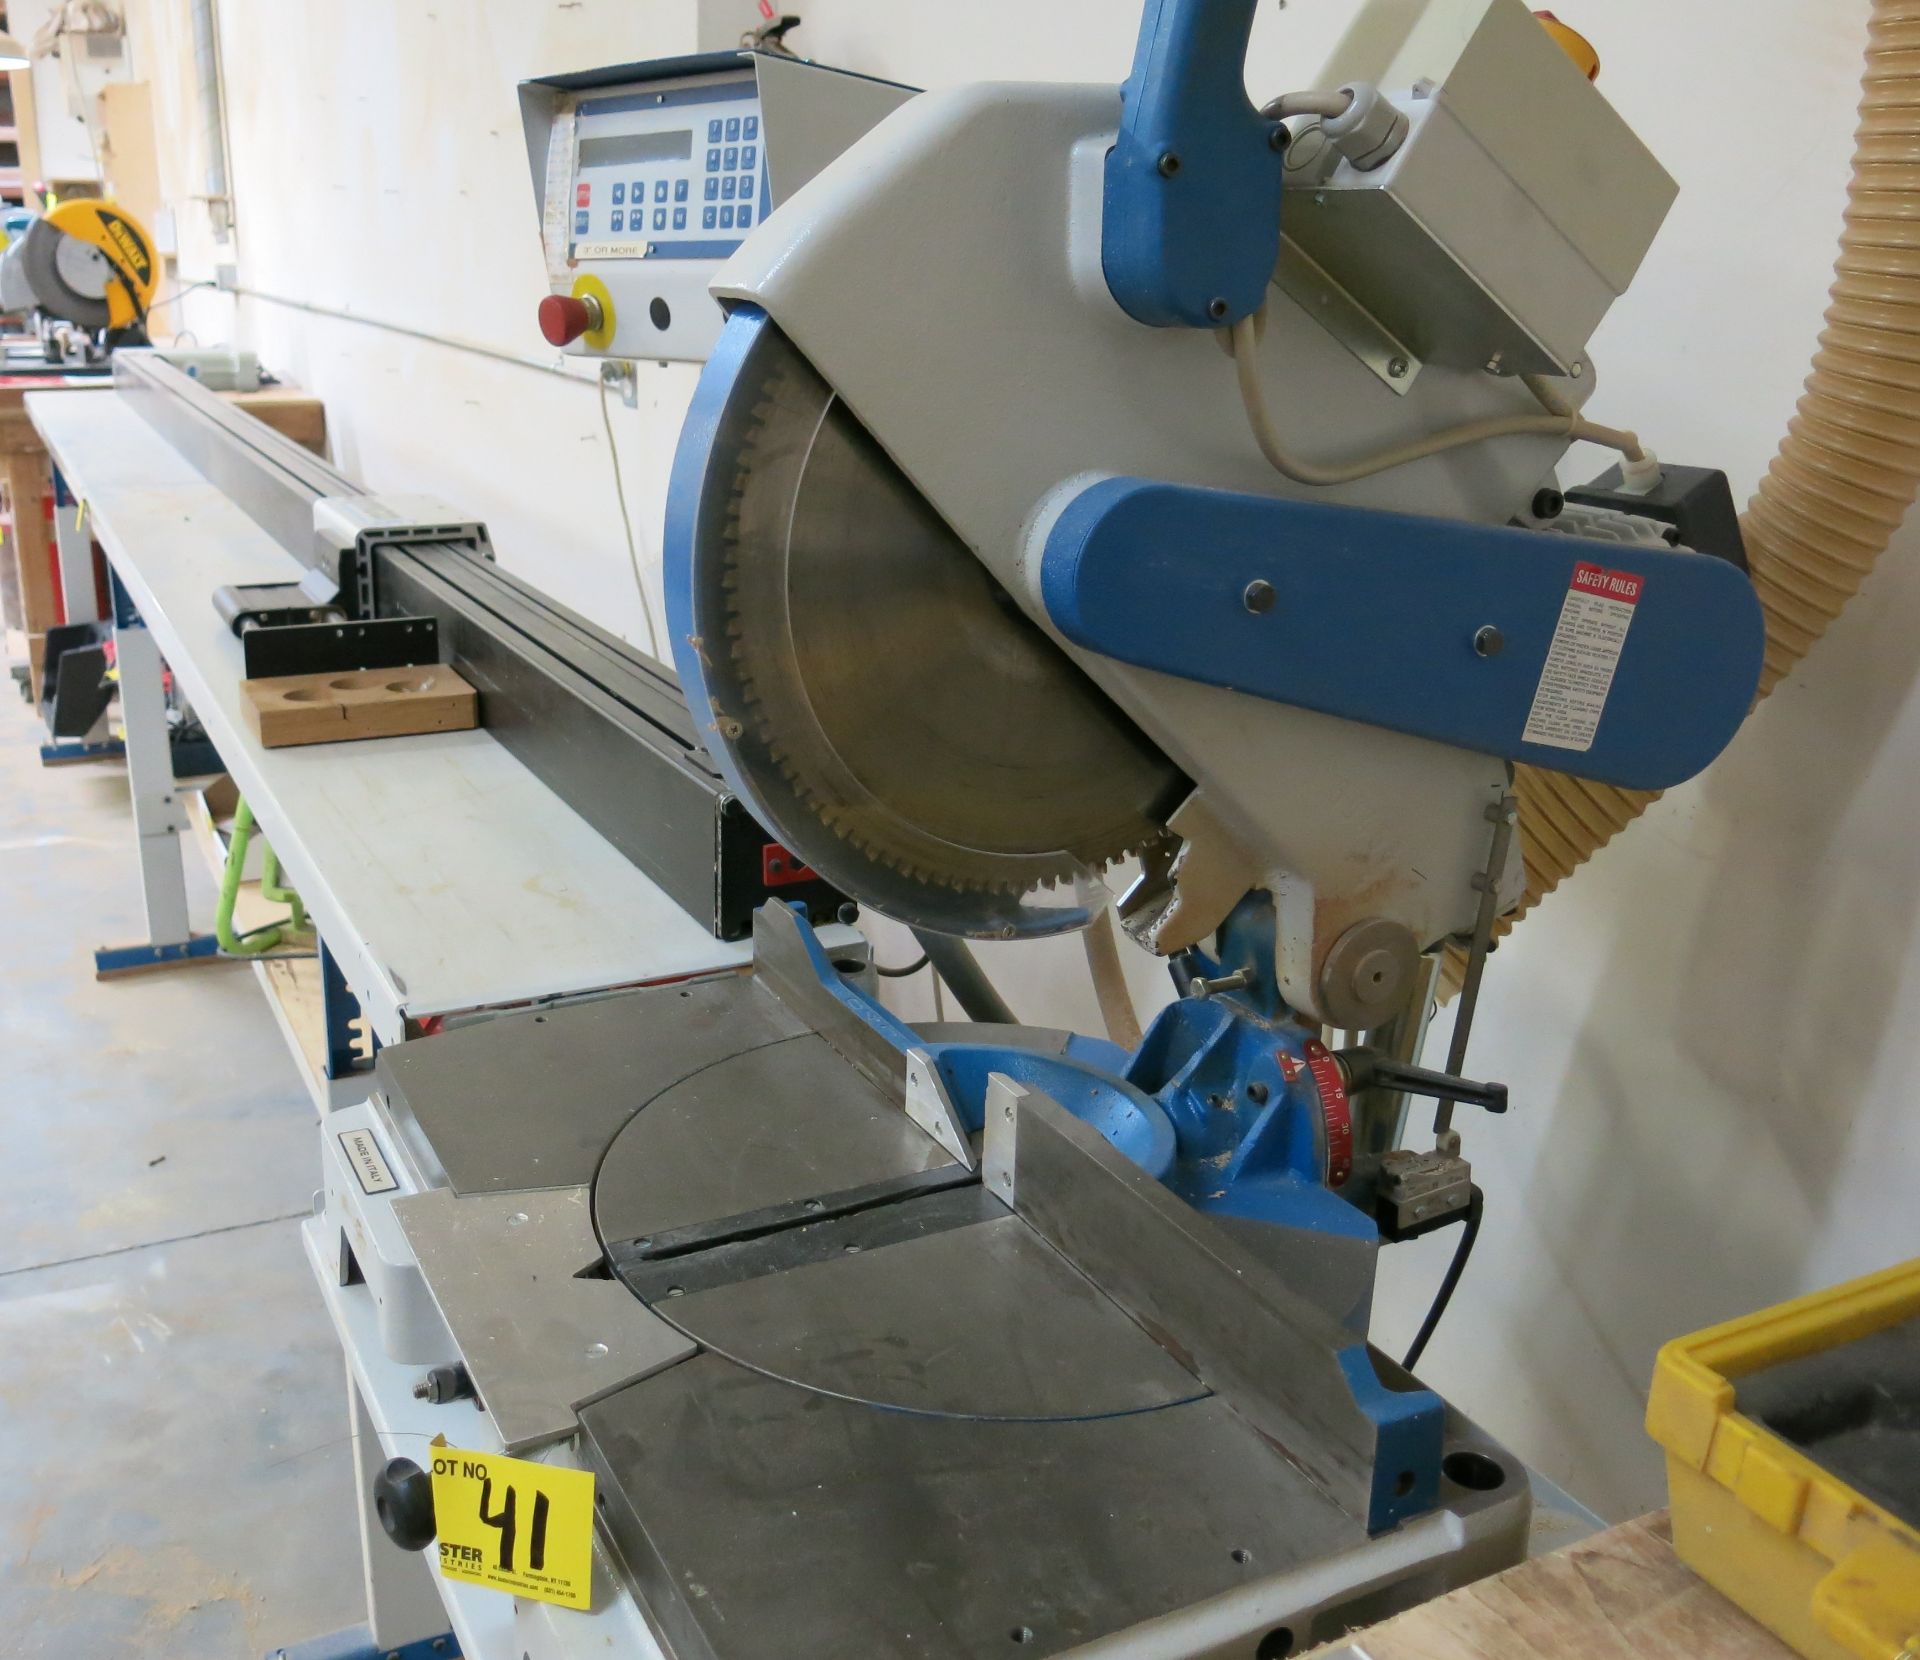 (1) OMGA MDL. T53 350 12" MITER SAW, WITH OMGA MDL. EP4000SX 15 FT. FINE POSITIONING SYSTEM WITH